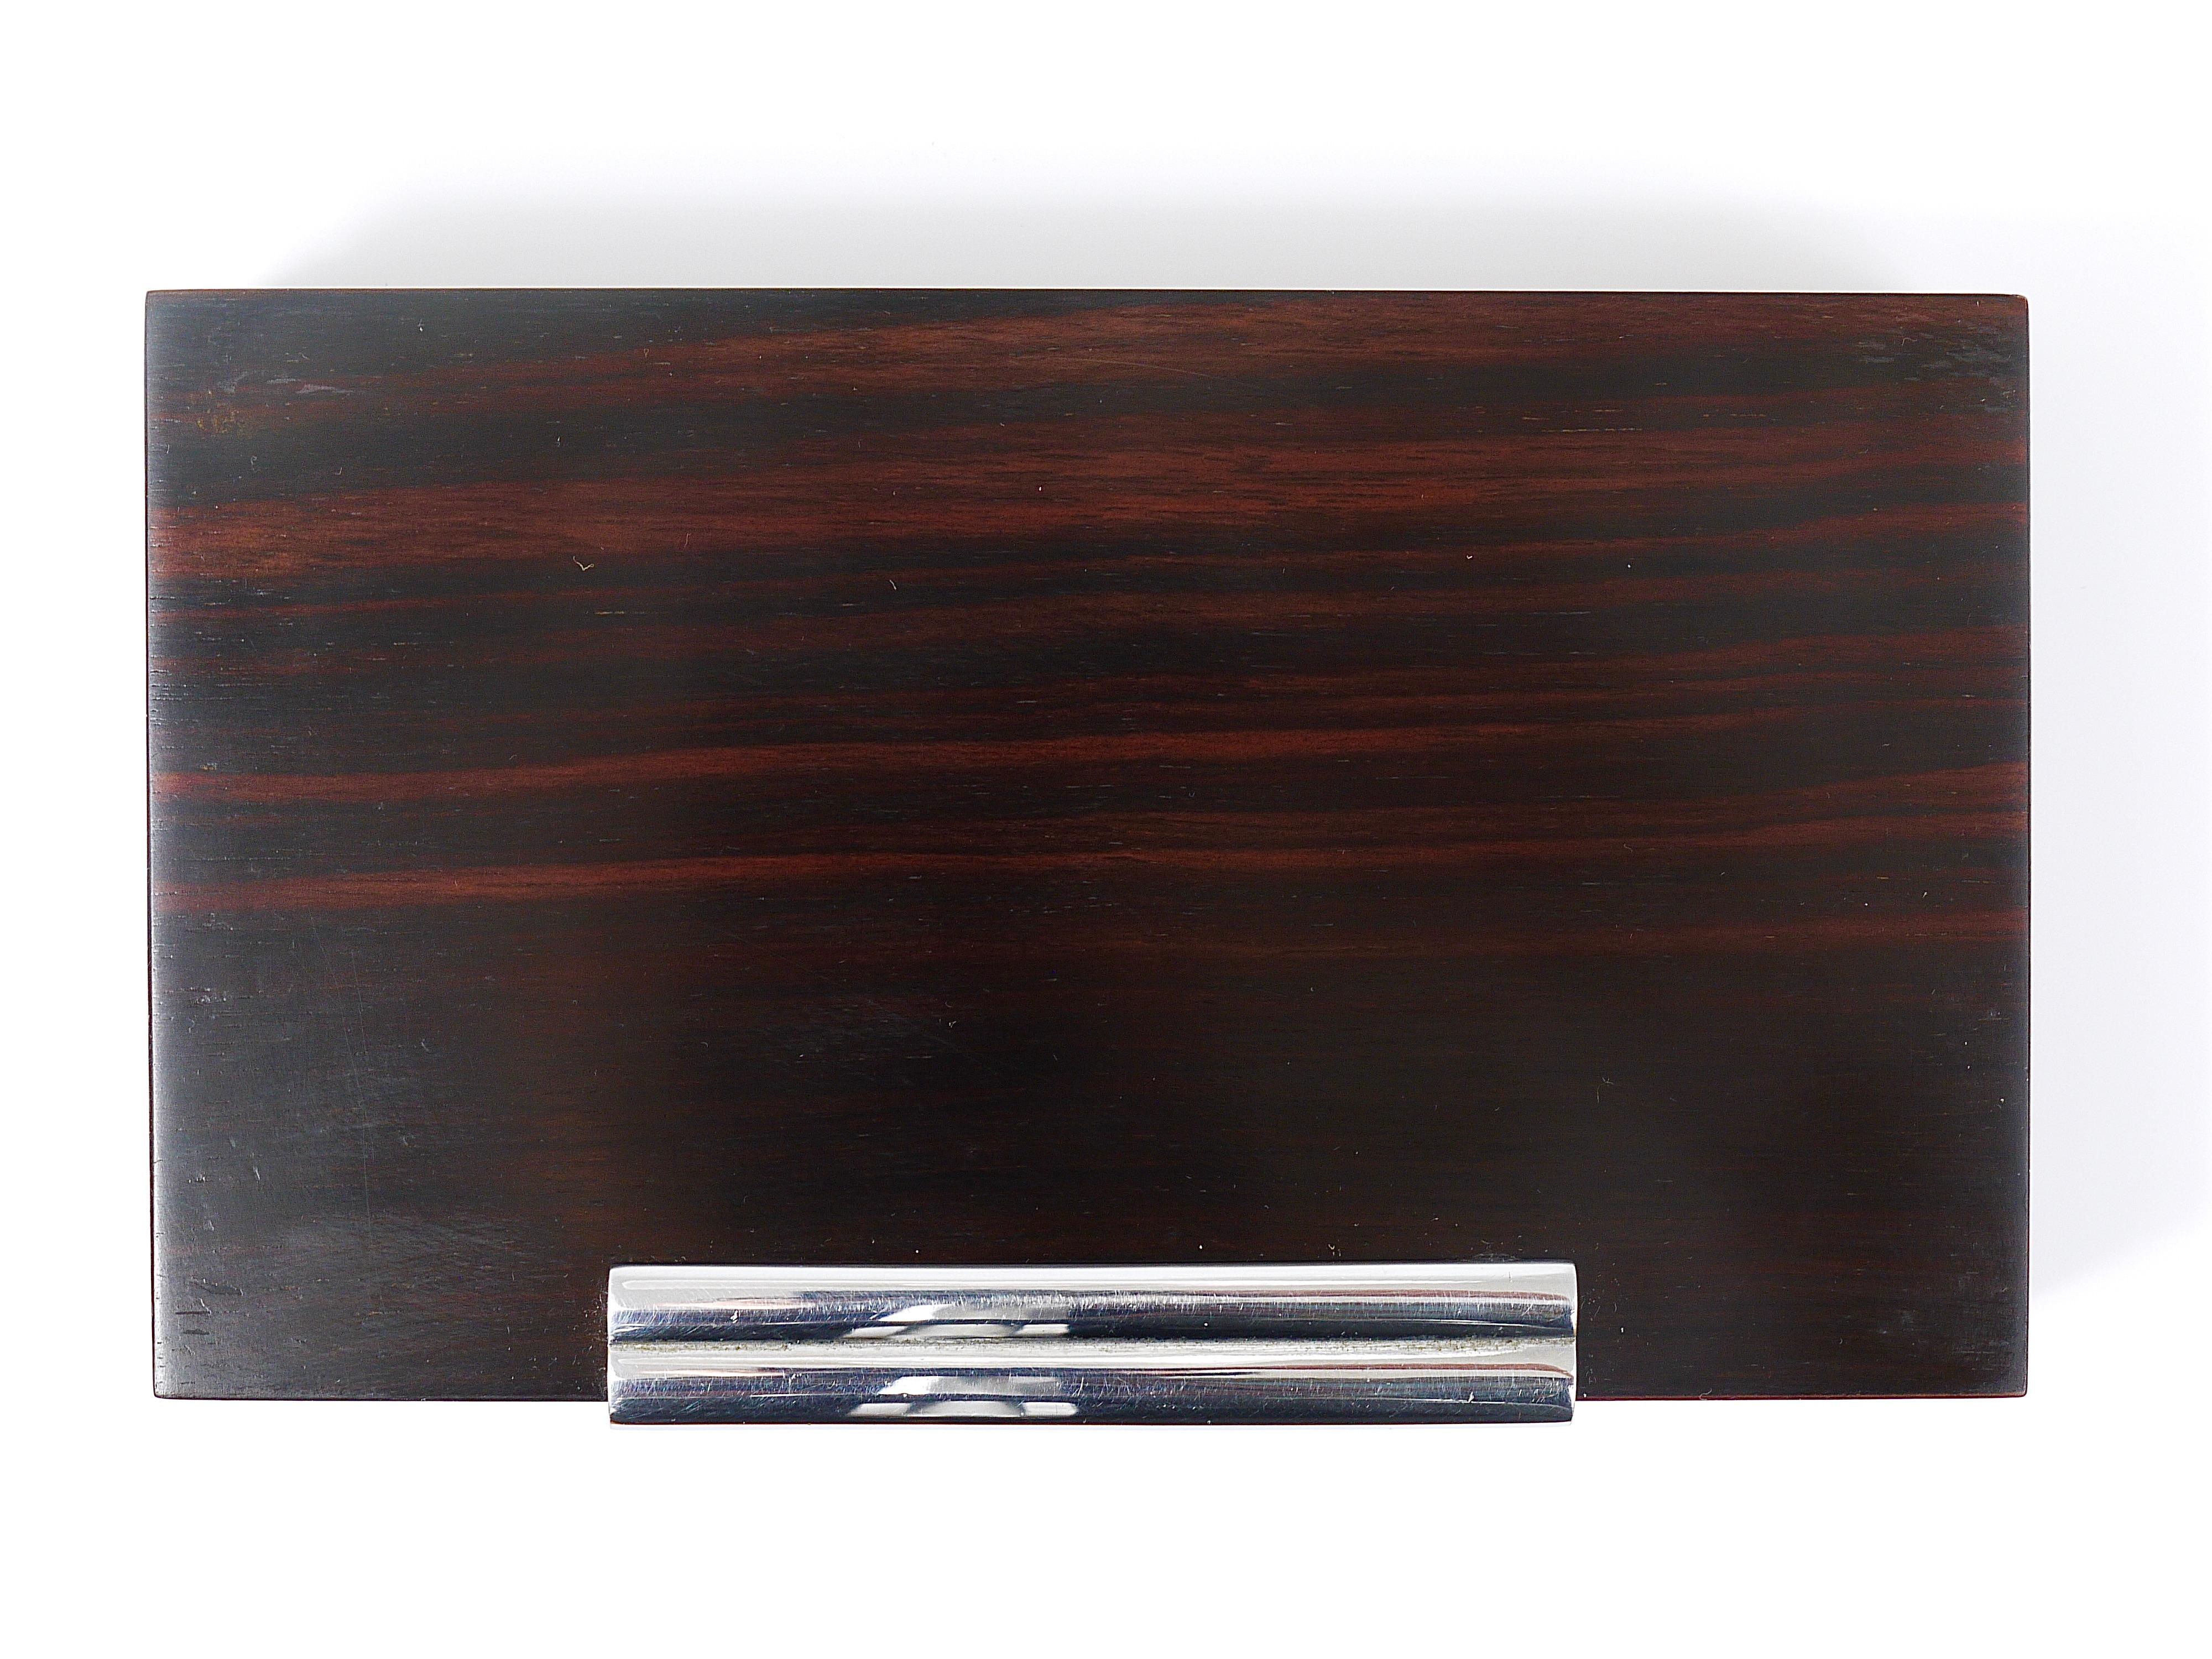 French Art Deco Rosewood & Nickel Storage Box, Maison Desny Style, France, 1930s For Sale 13